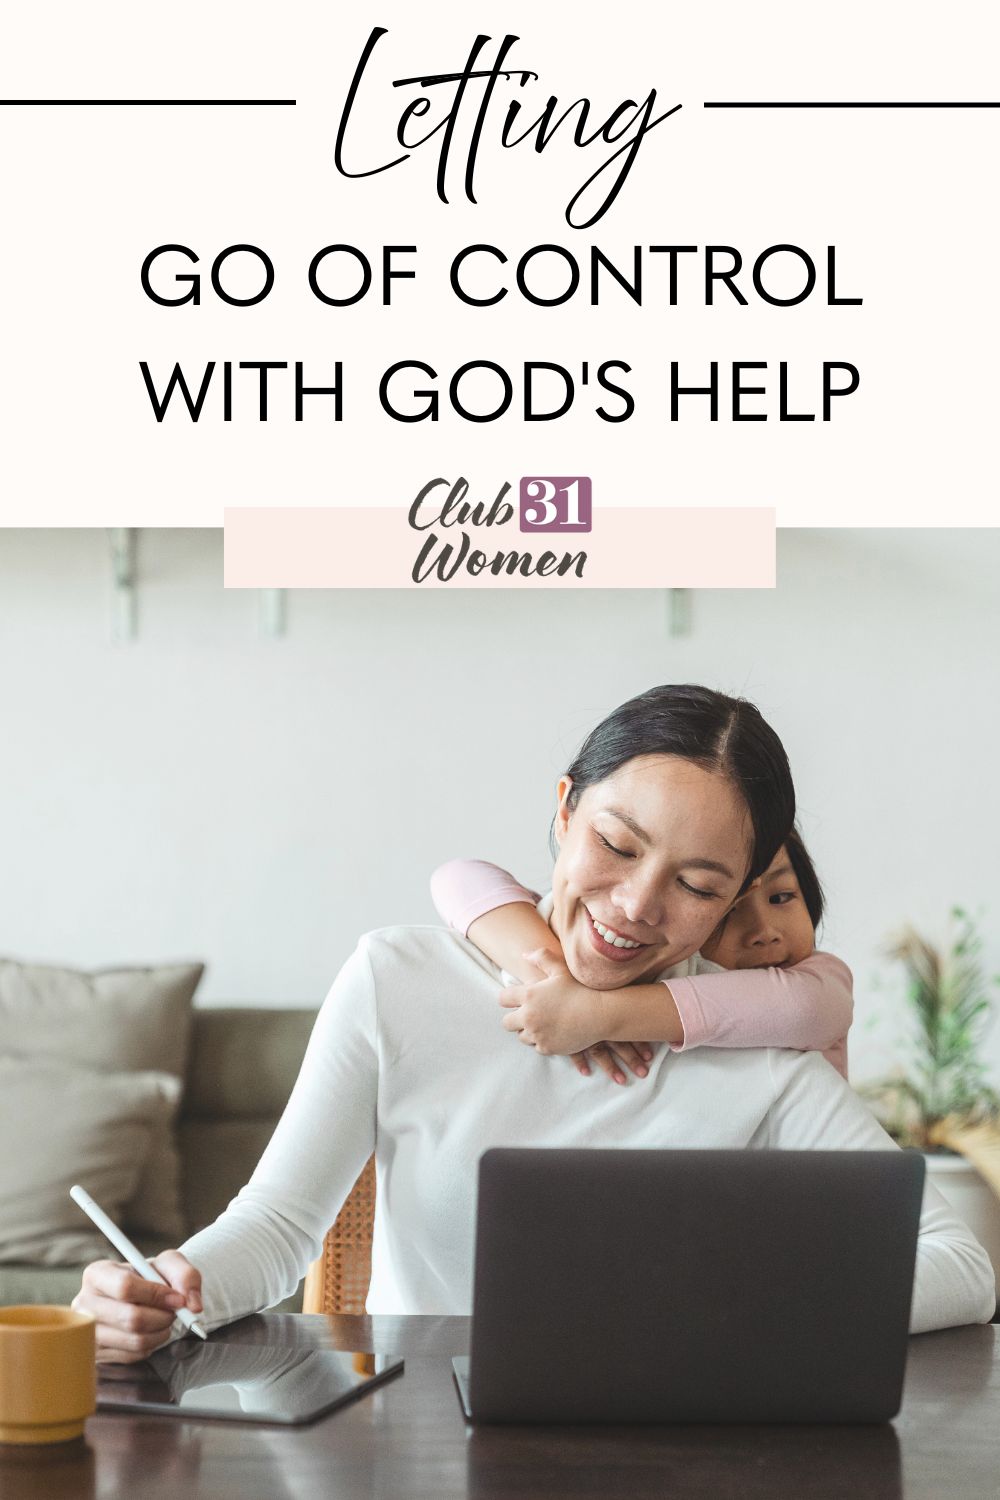 Do you struggle with letting go of control and holding on to things too tightly? You may want control because you have a fear of the unknown, and thinking about the future makes you anxious. via @Club31Women